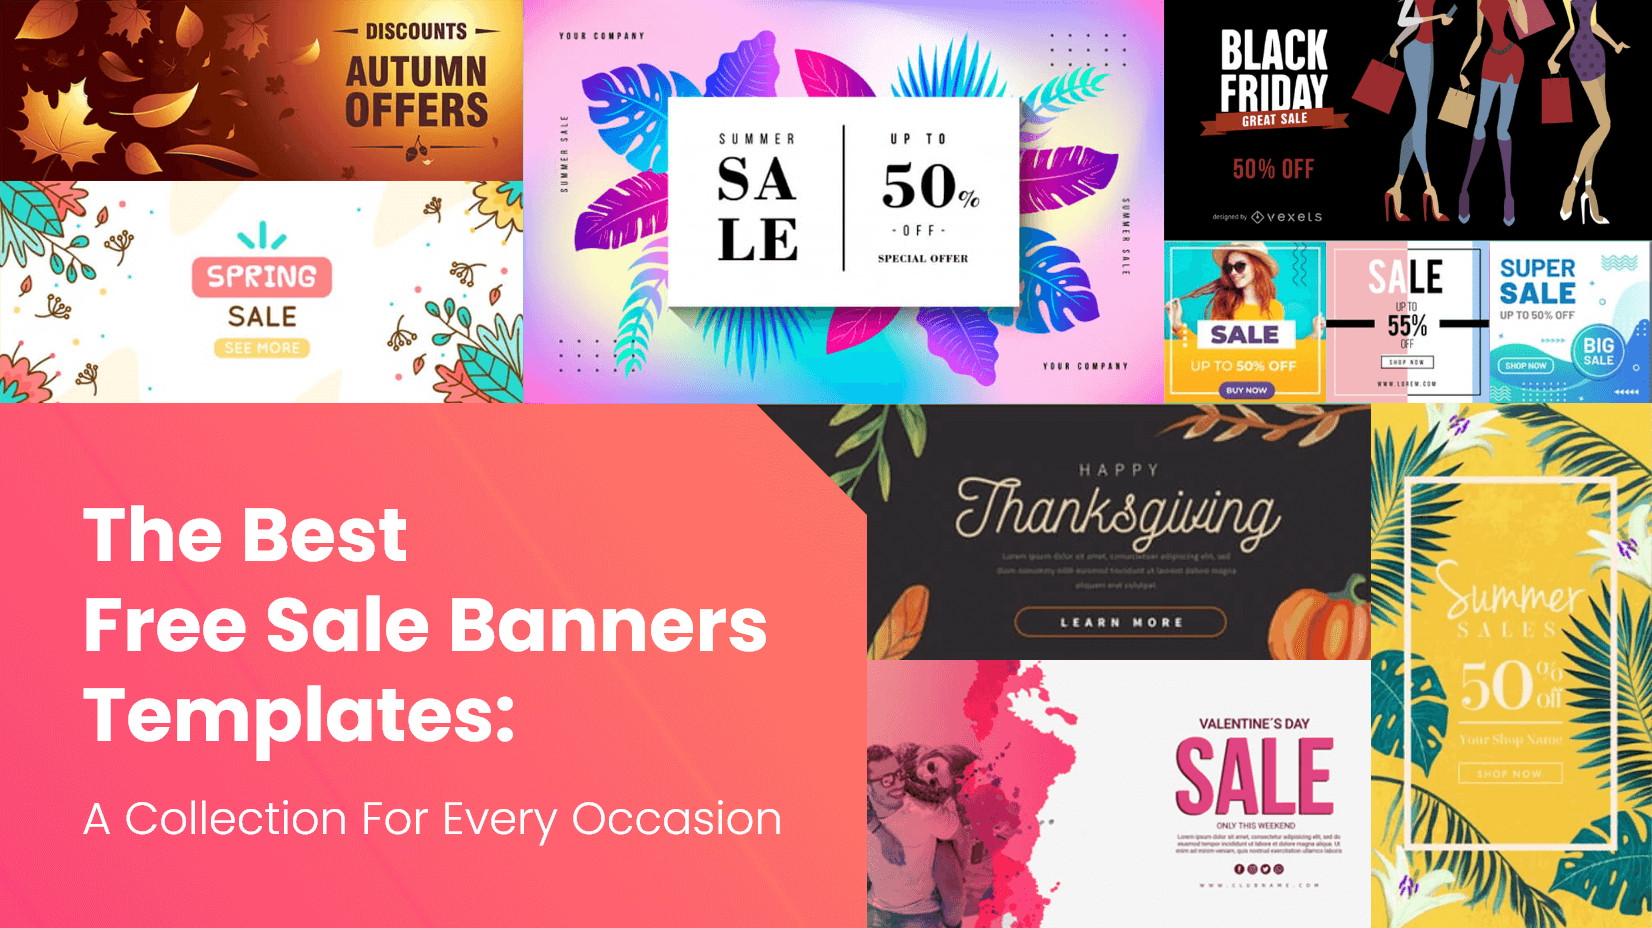 The Best Free Sale Banners Templates: A Collection For Every With Regard To Website Banner Templates Free Download